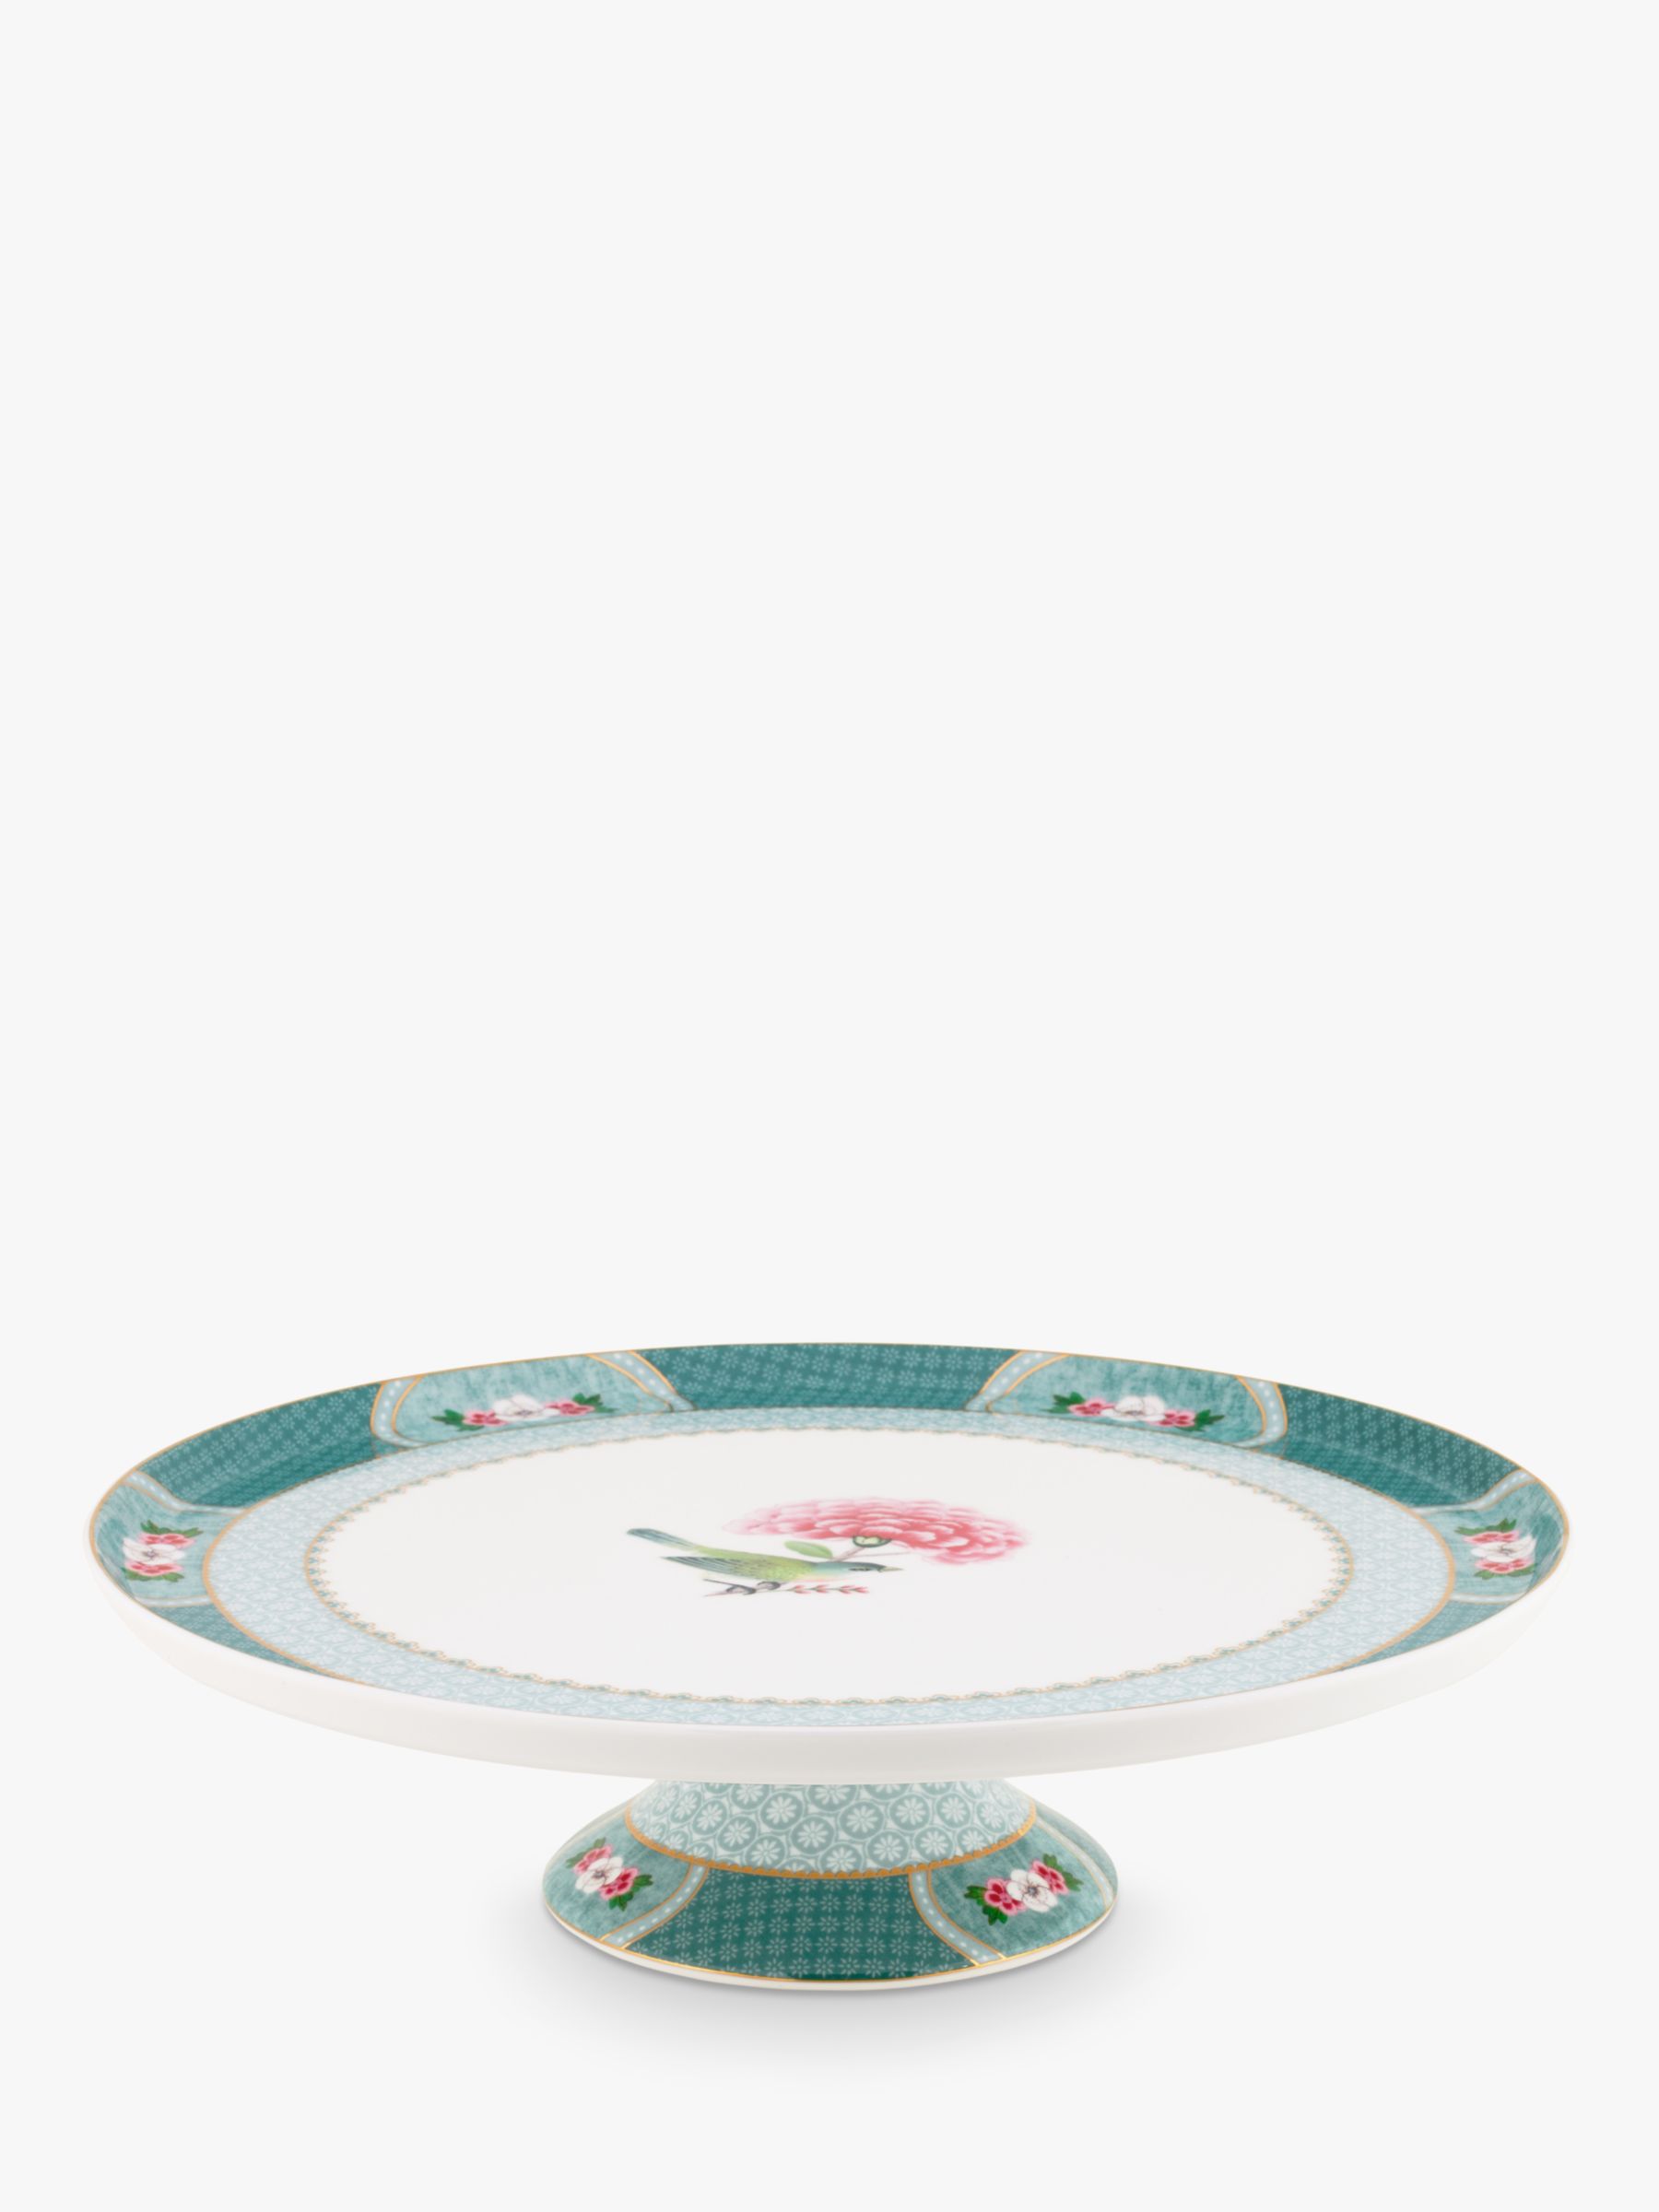 PiP Studio Blushing Birds Footed Cake Stand, 31cm, Blue